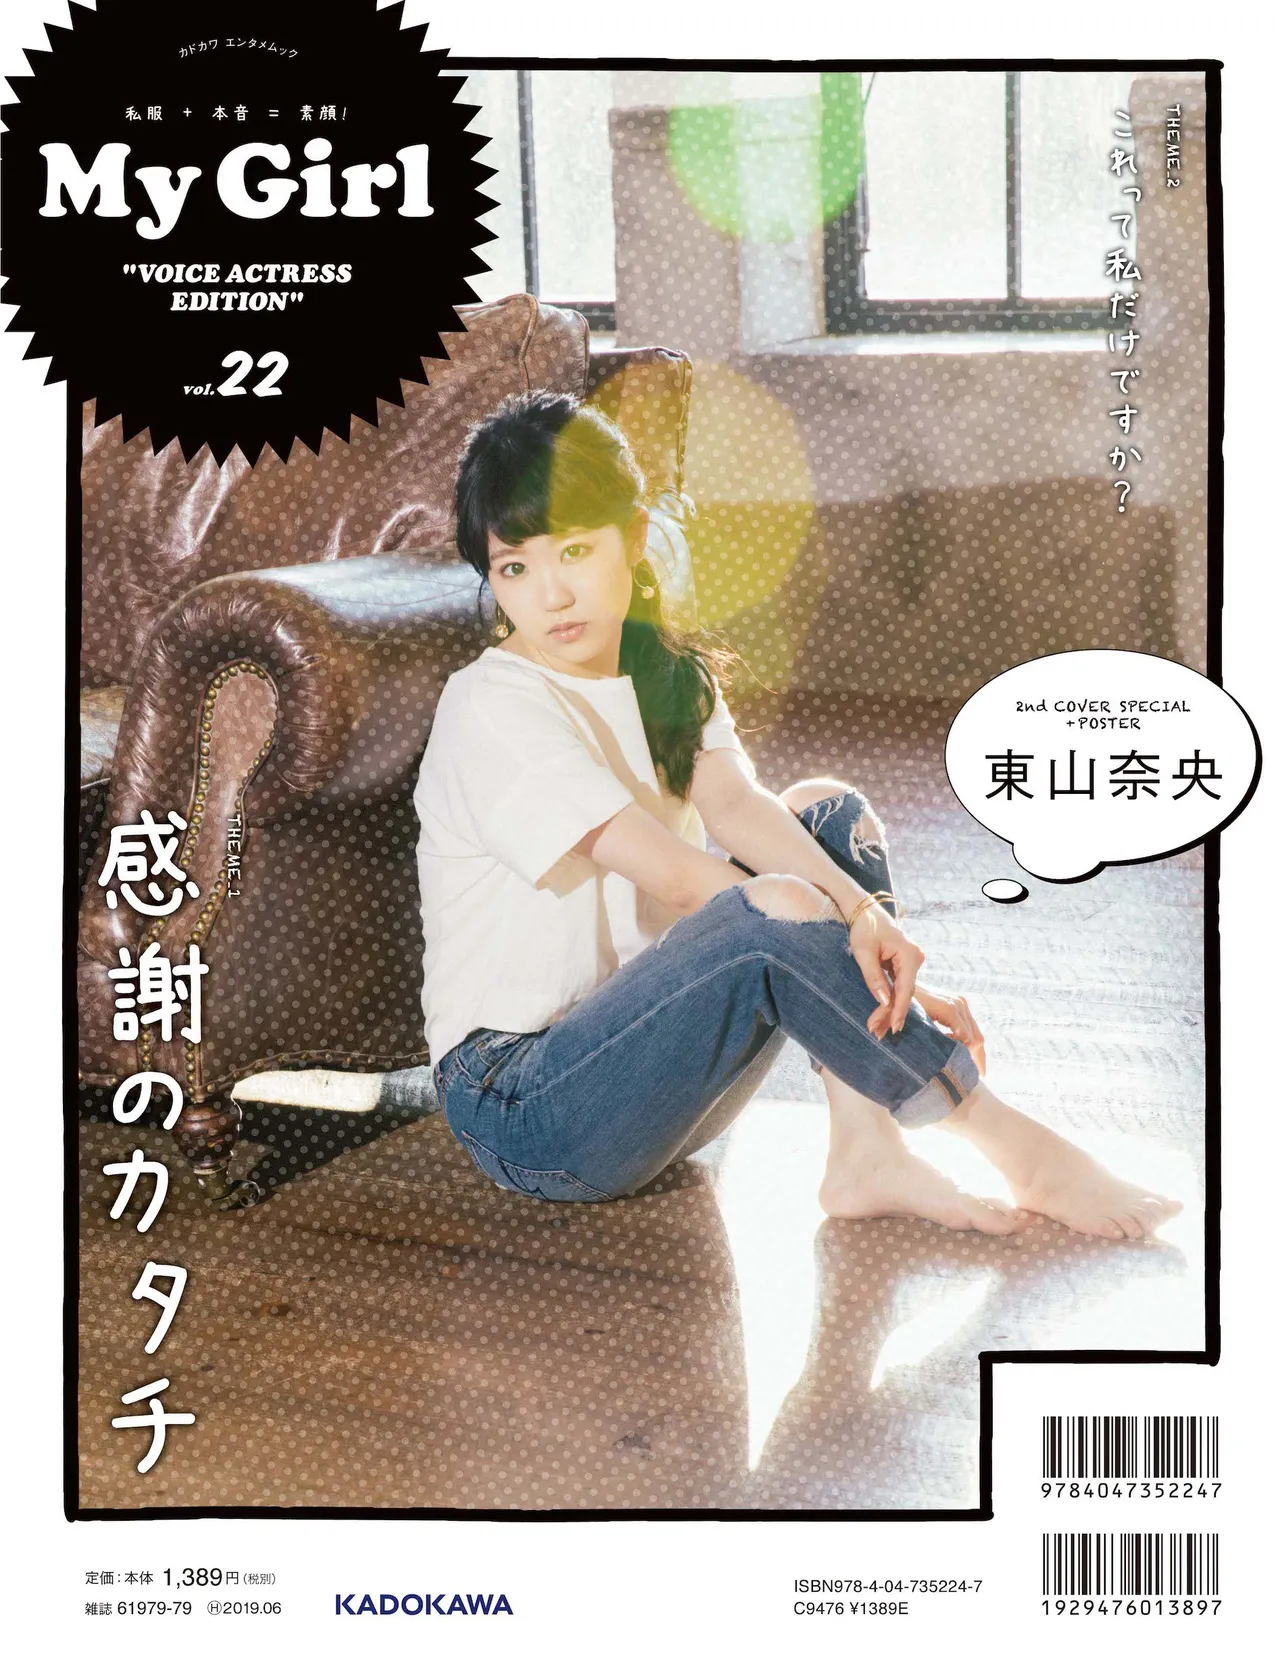 「My Girl vol.22」2nd Cover / 東山奈央